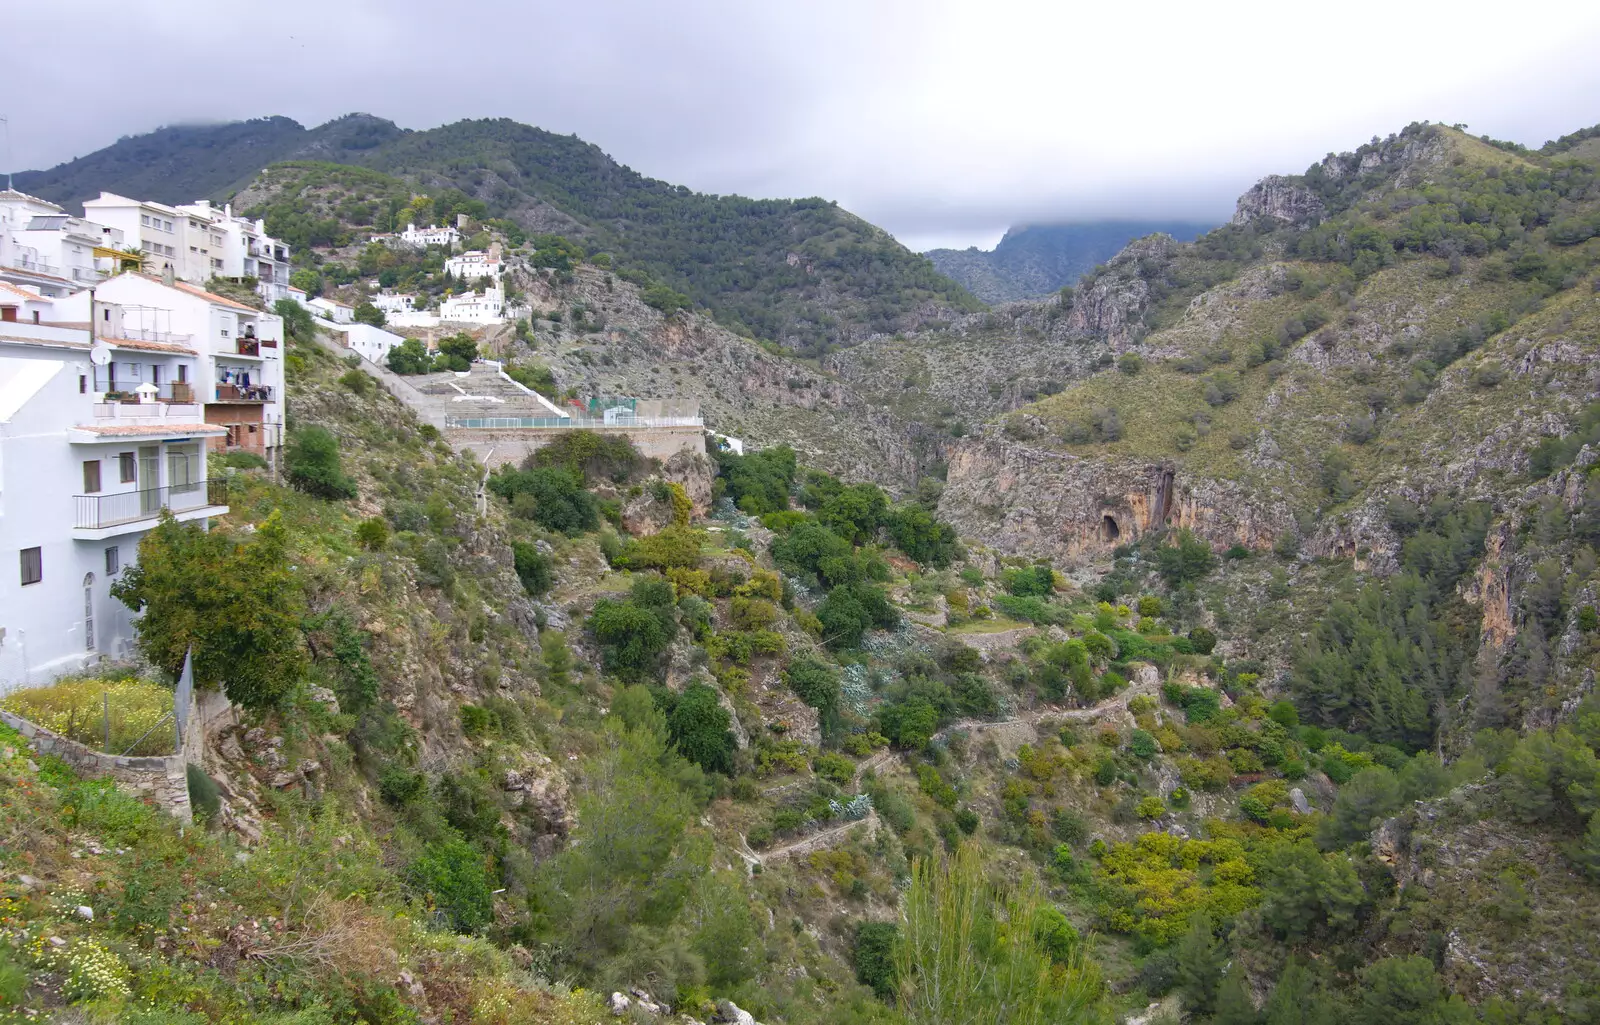 The train stops by this impressive gorge, from The Caves of Nerja, and Frigiliana, Andalusia, Spain - 18th April 2019